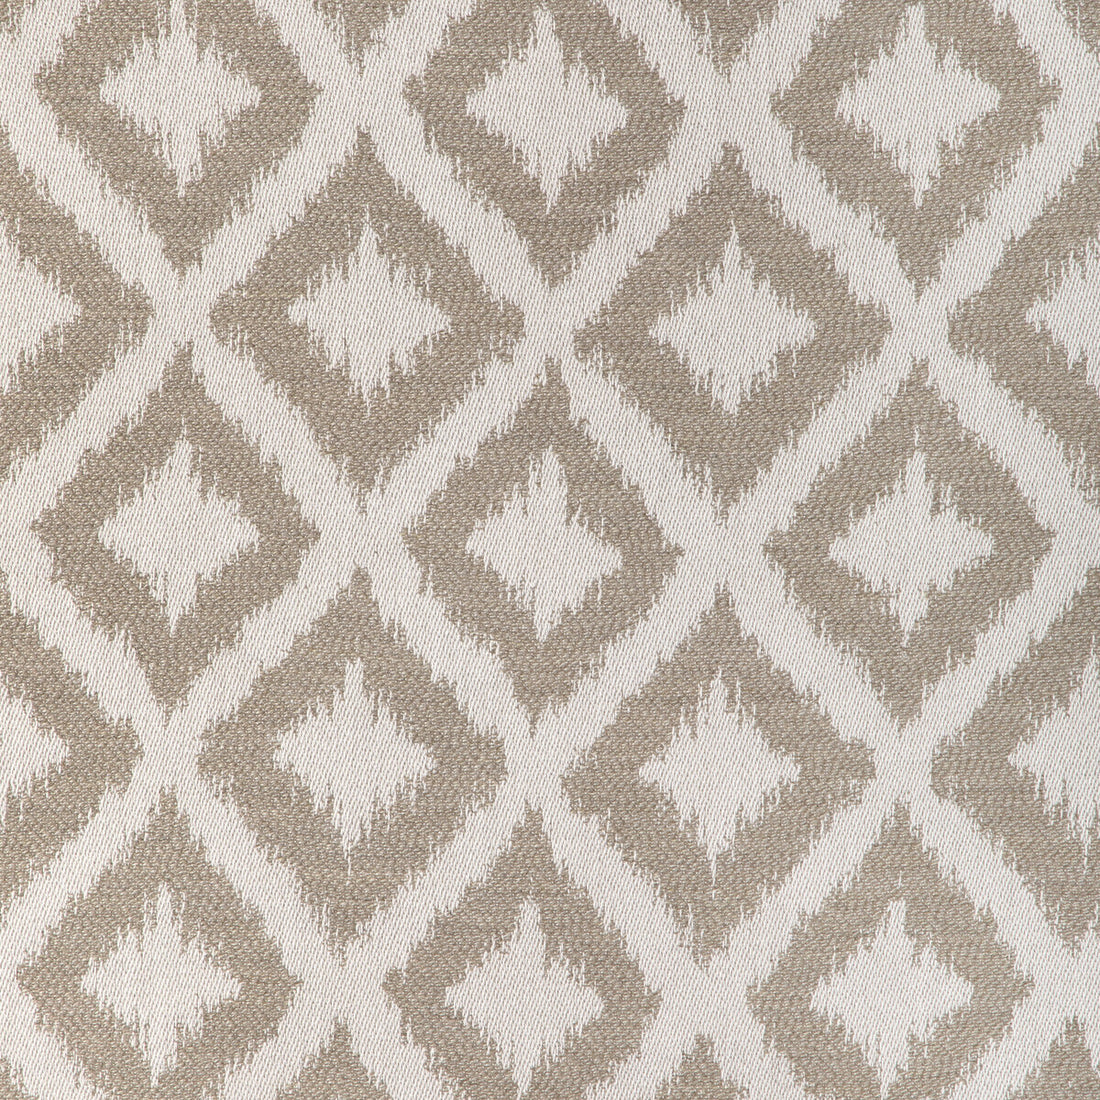 Eastham Breeze fabric in sand color - pattern 36933.16.0 - by Kravet Couture in the Riviera collection